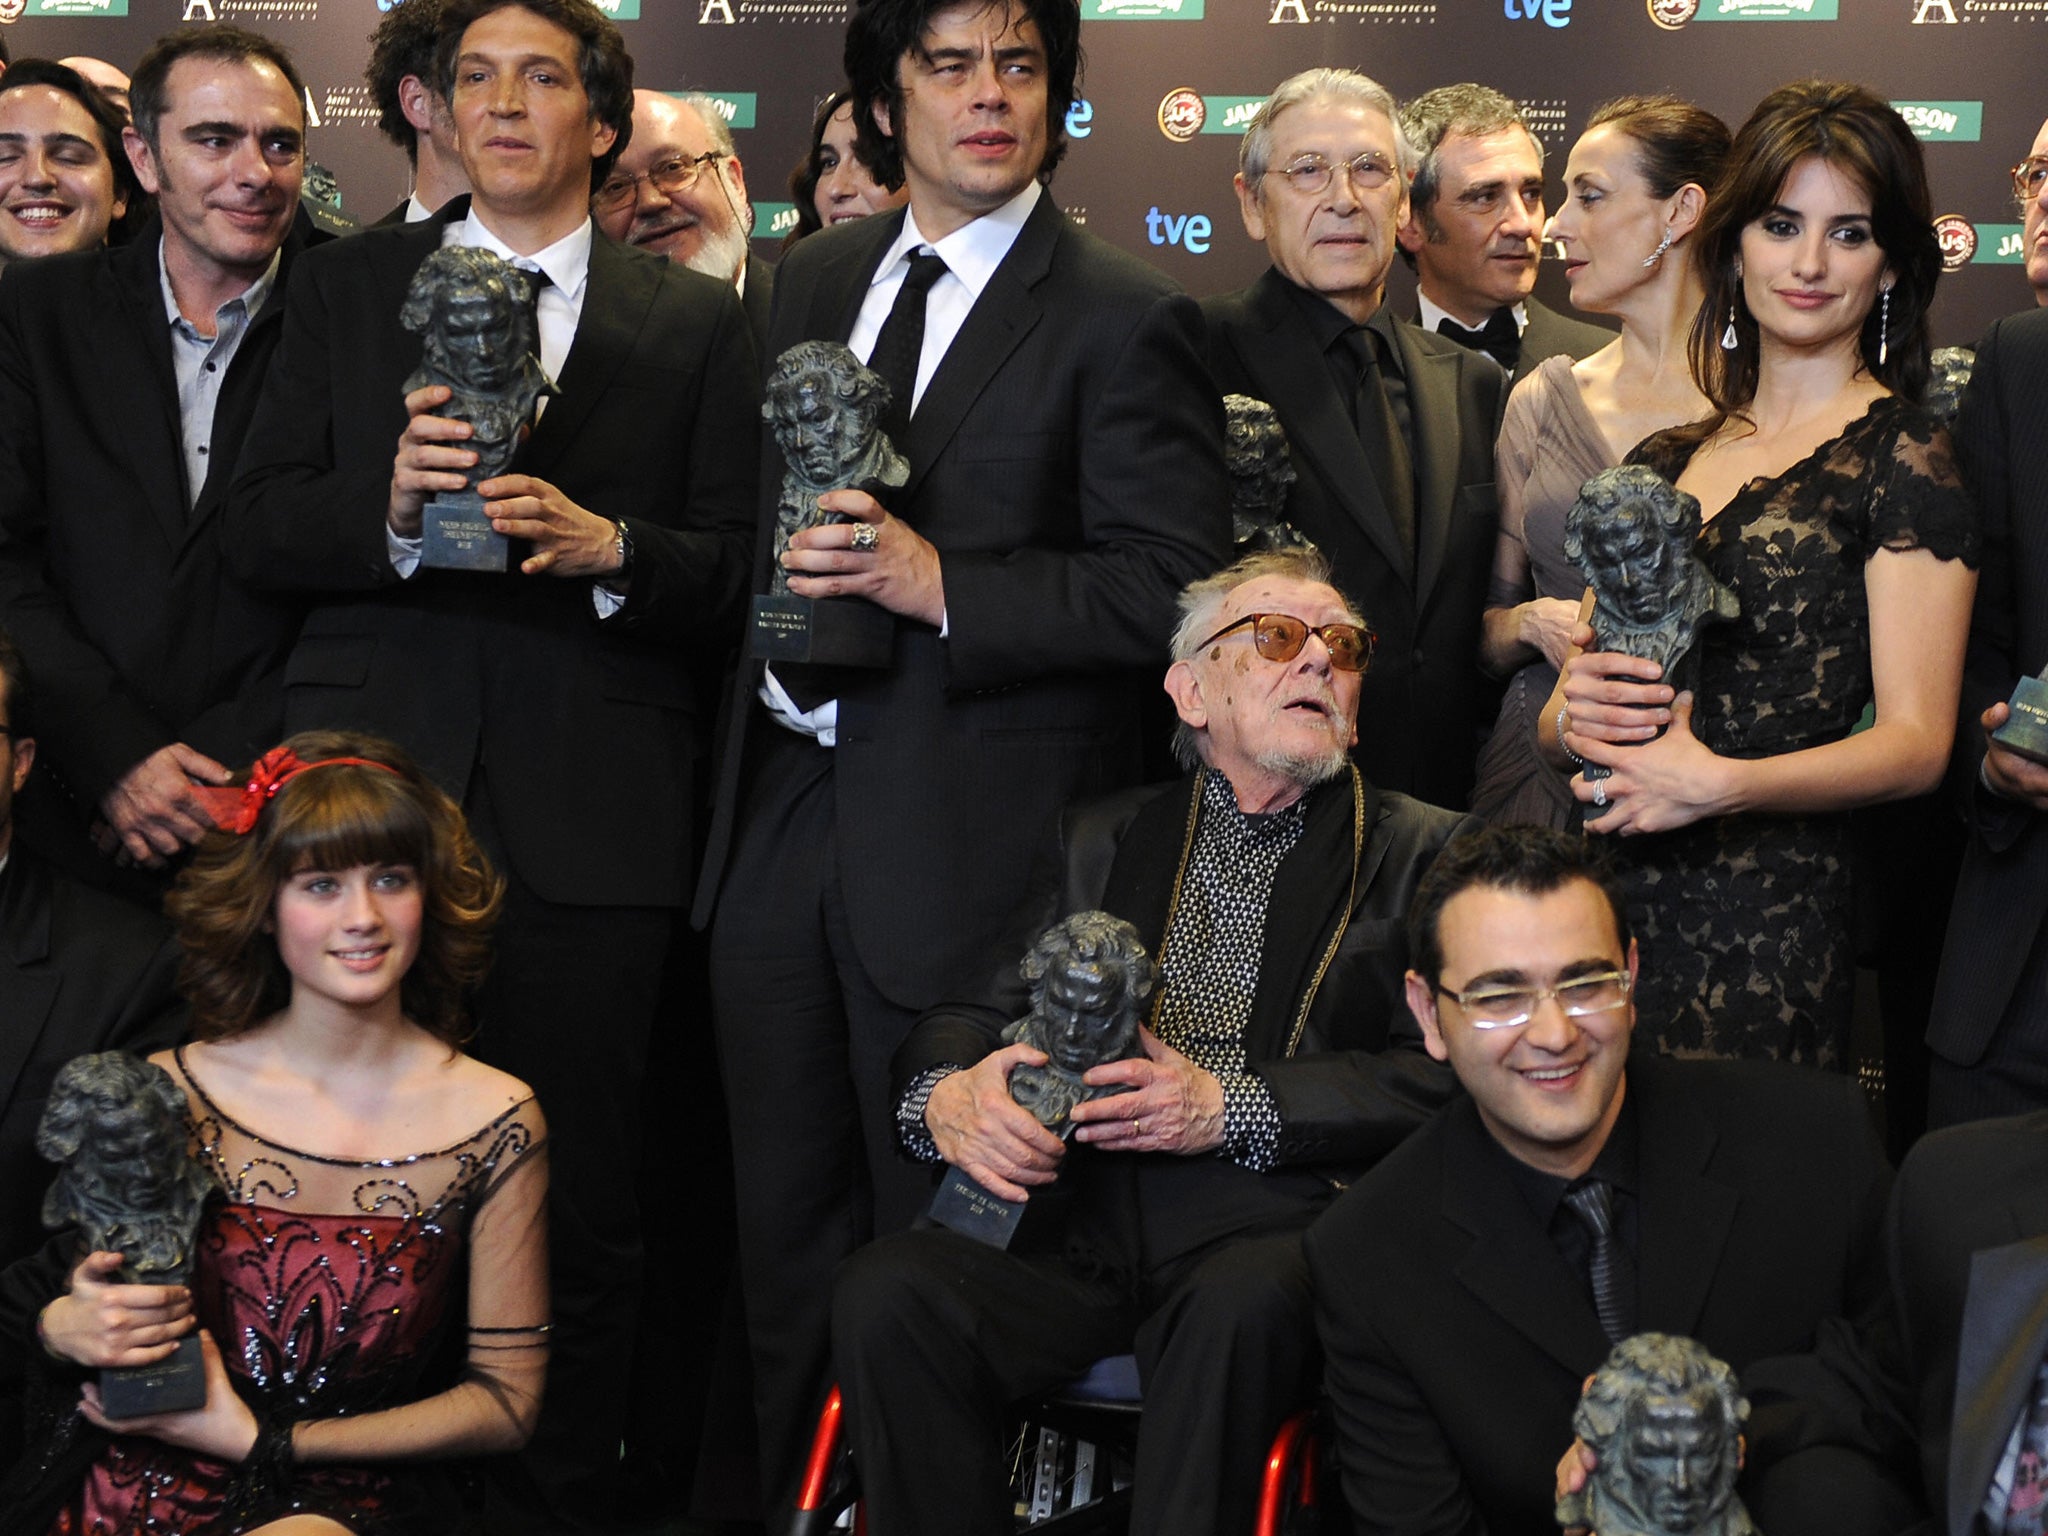 Franco, seated, flanked by Benicio del Toro and Penelope Cruz, receives a lifetime achievement award in 2009